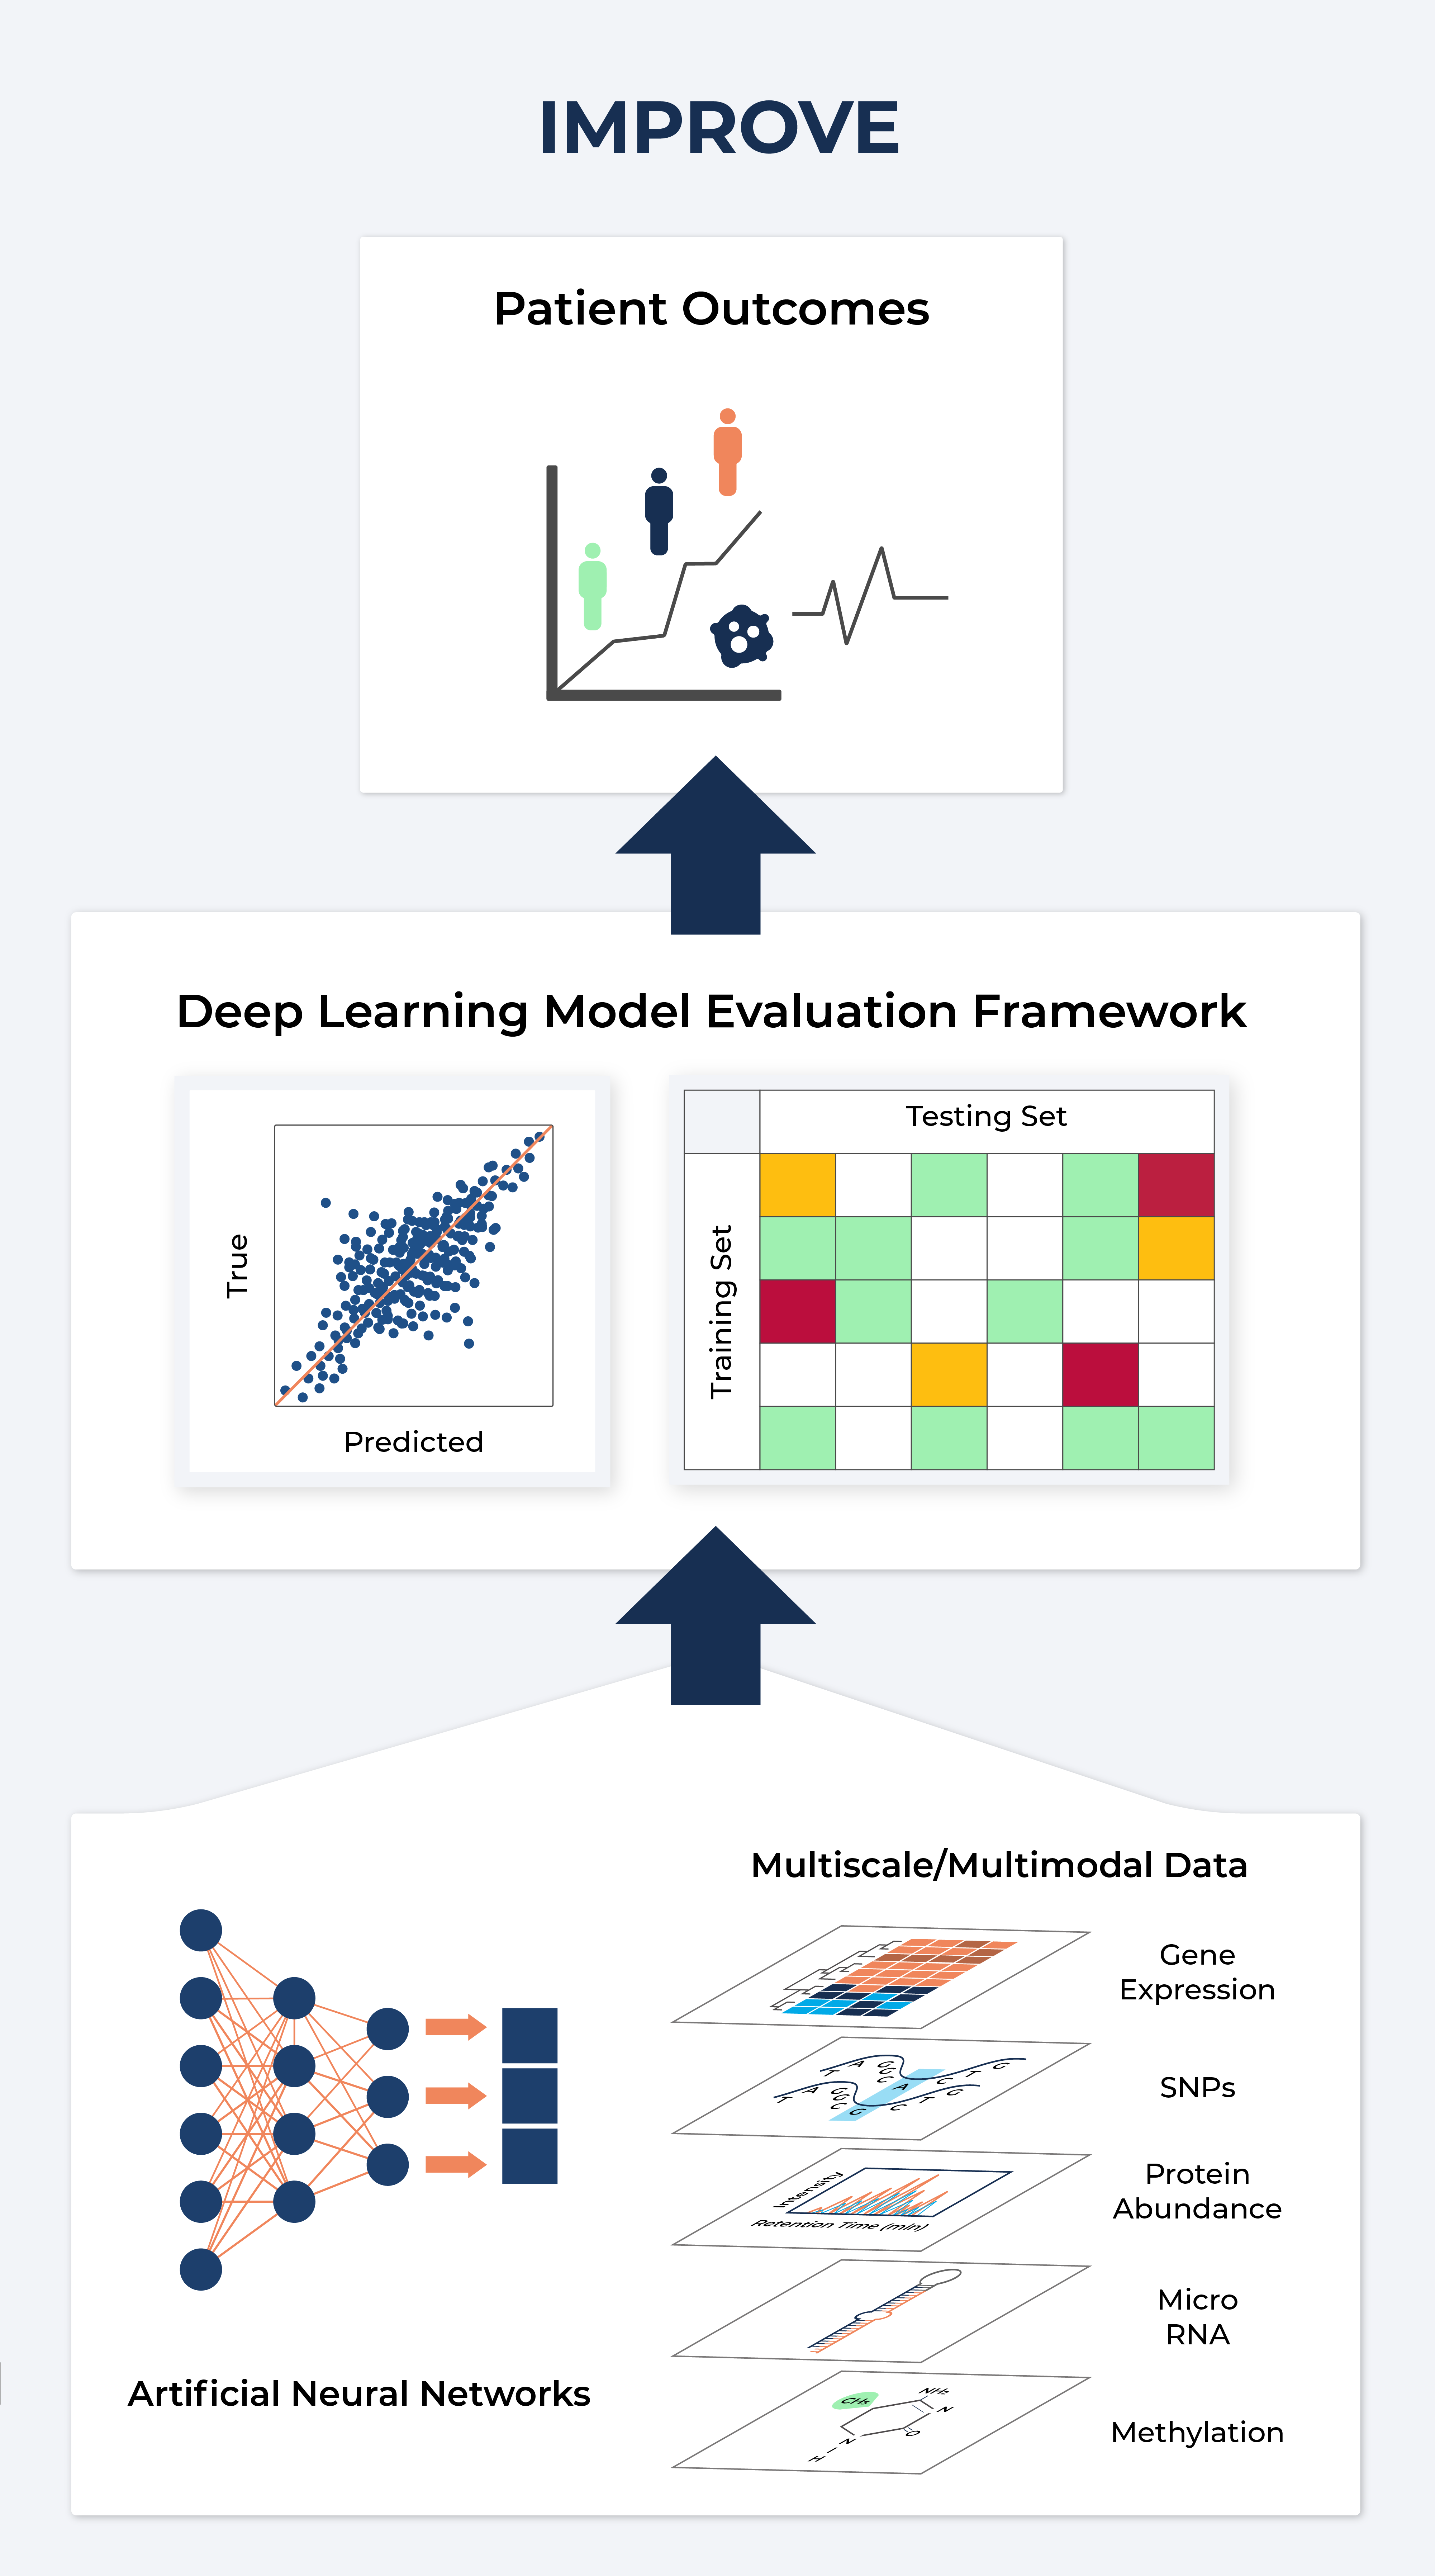 Image demonstrates how artificial neural networks and multiscale/multimodal data (gene expression, SNPs, protein abundance, microRNA, methylation) flow into the Deep Learning Model Evaluation framework, which flows into better-predicting patient outcomes. 